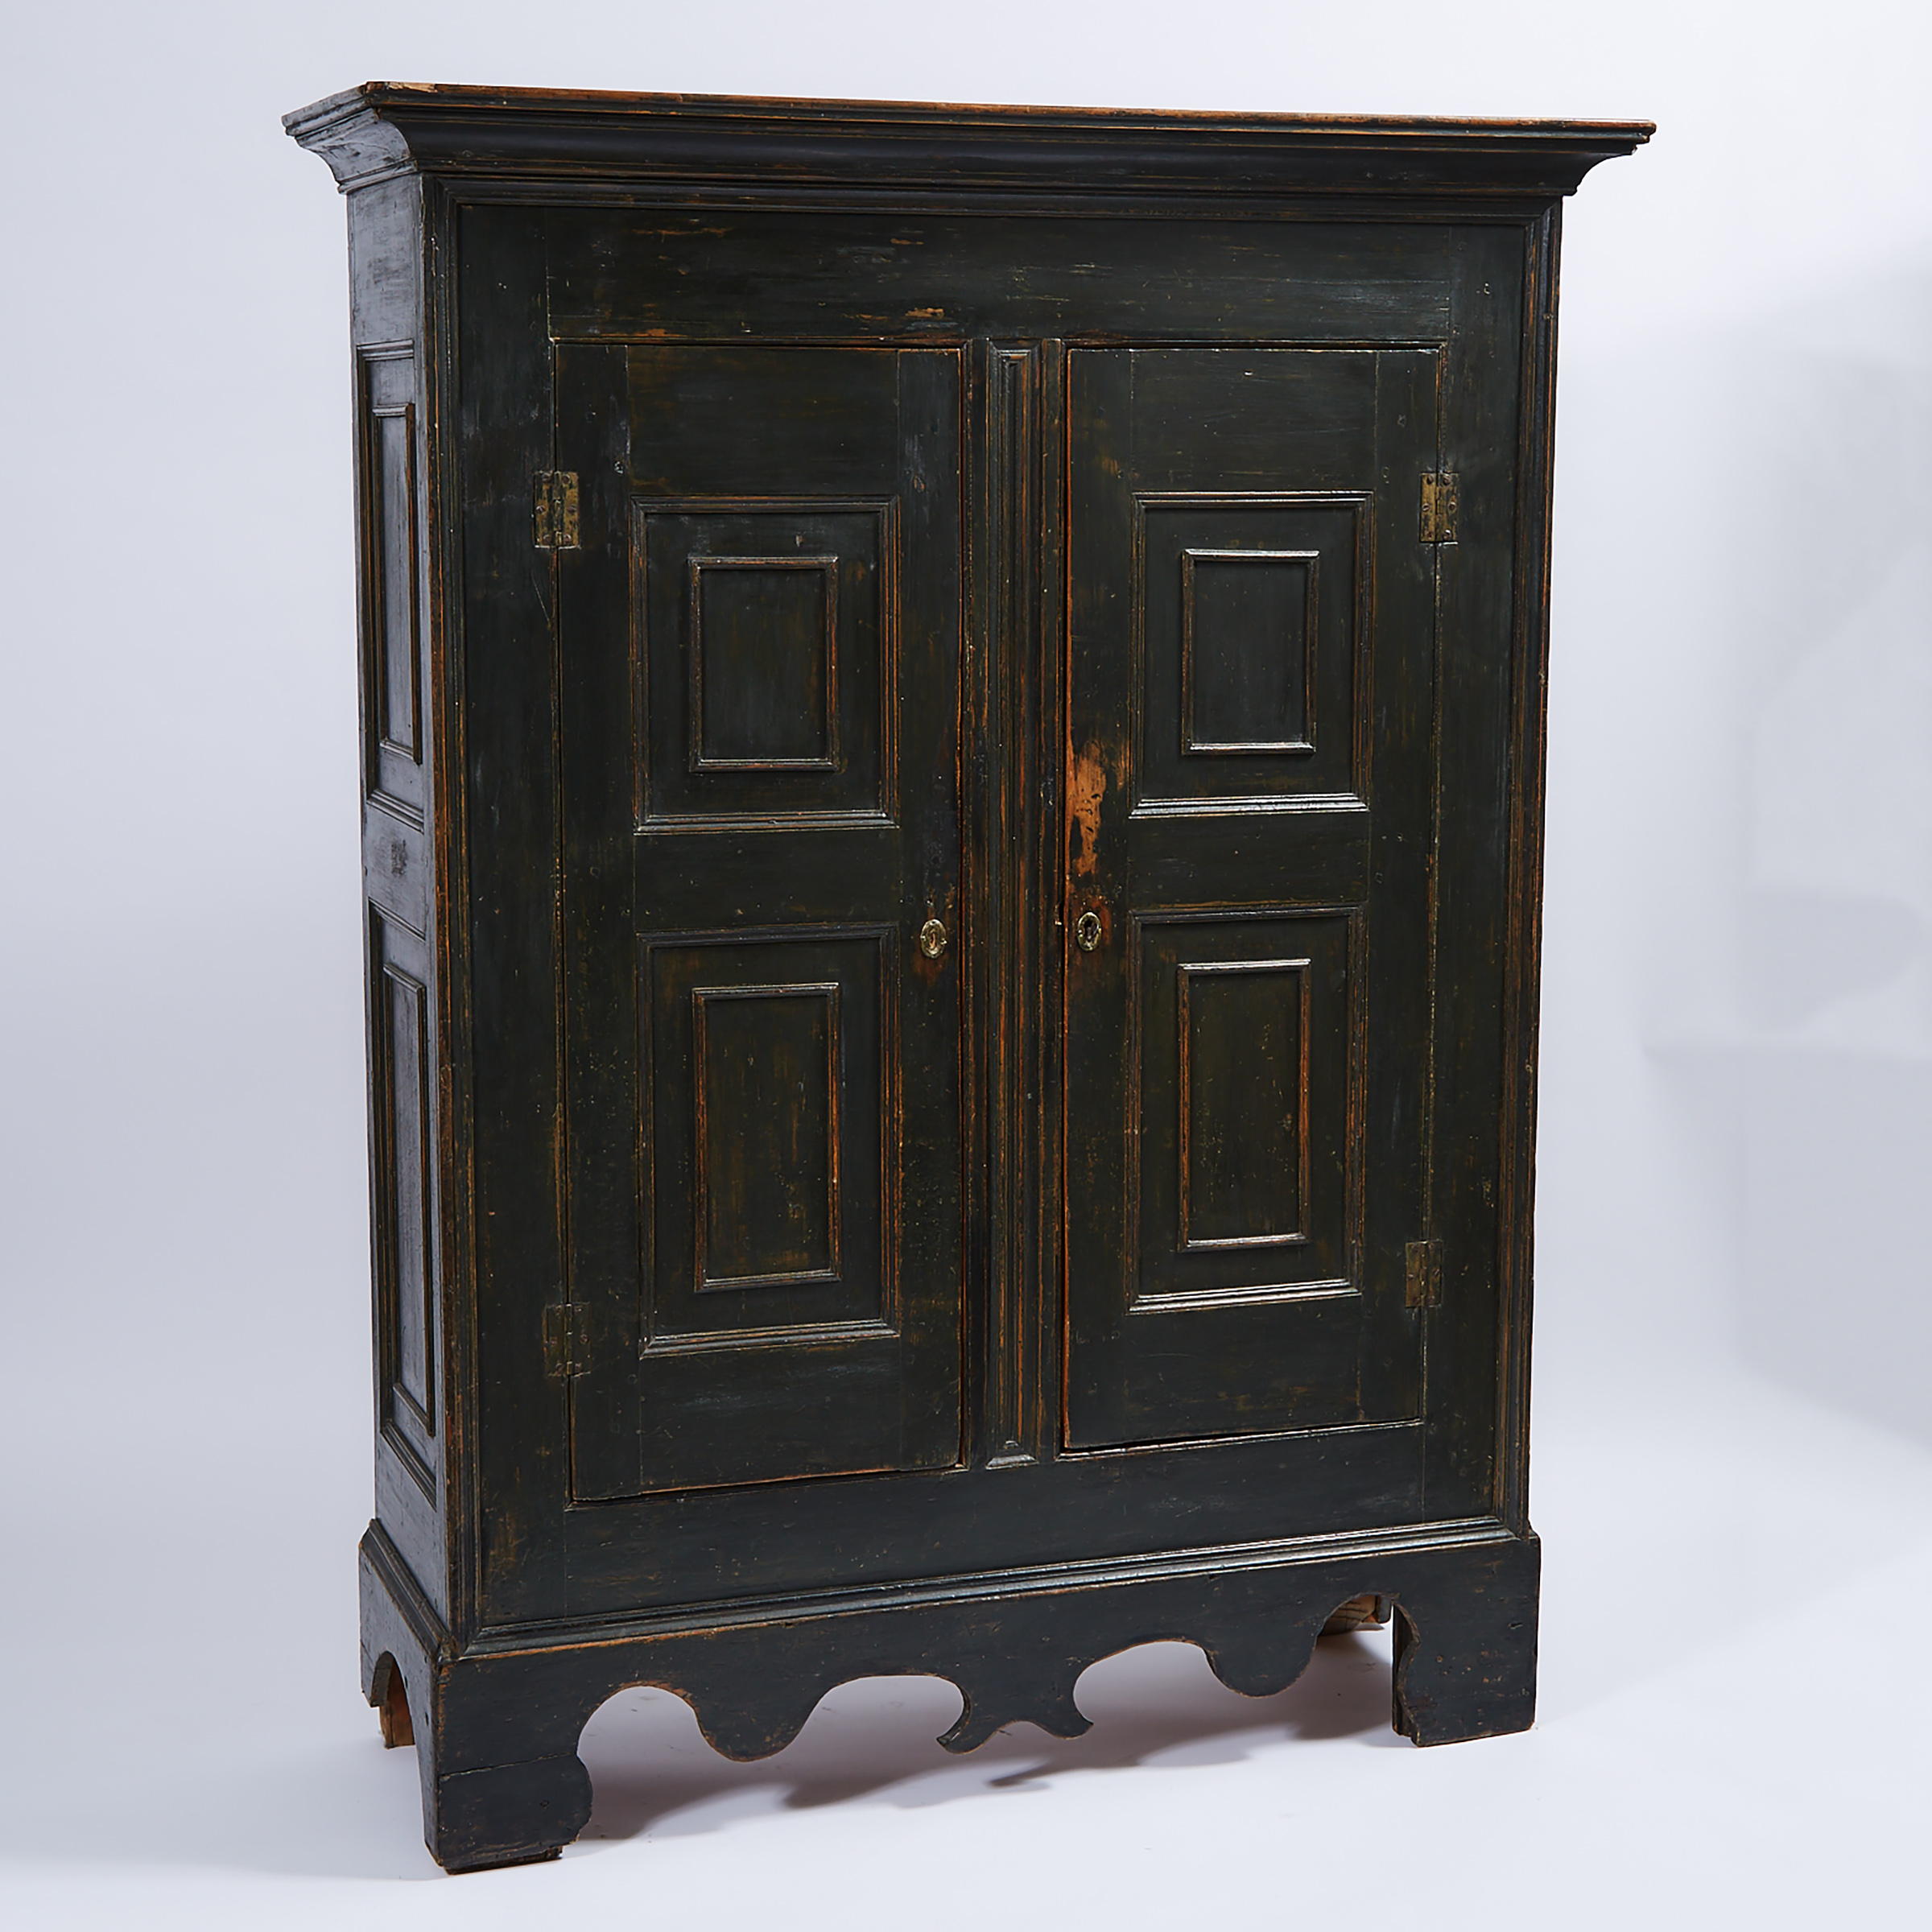 Quebec Painted Pine Armoire, early 19th century